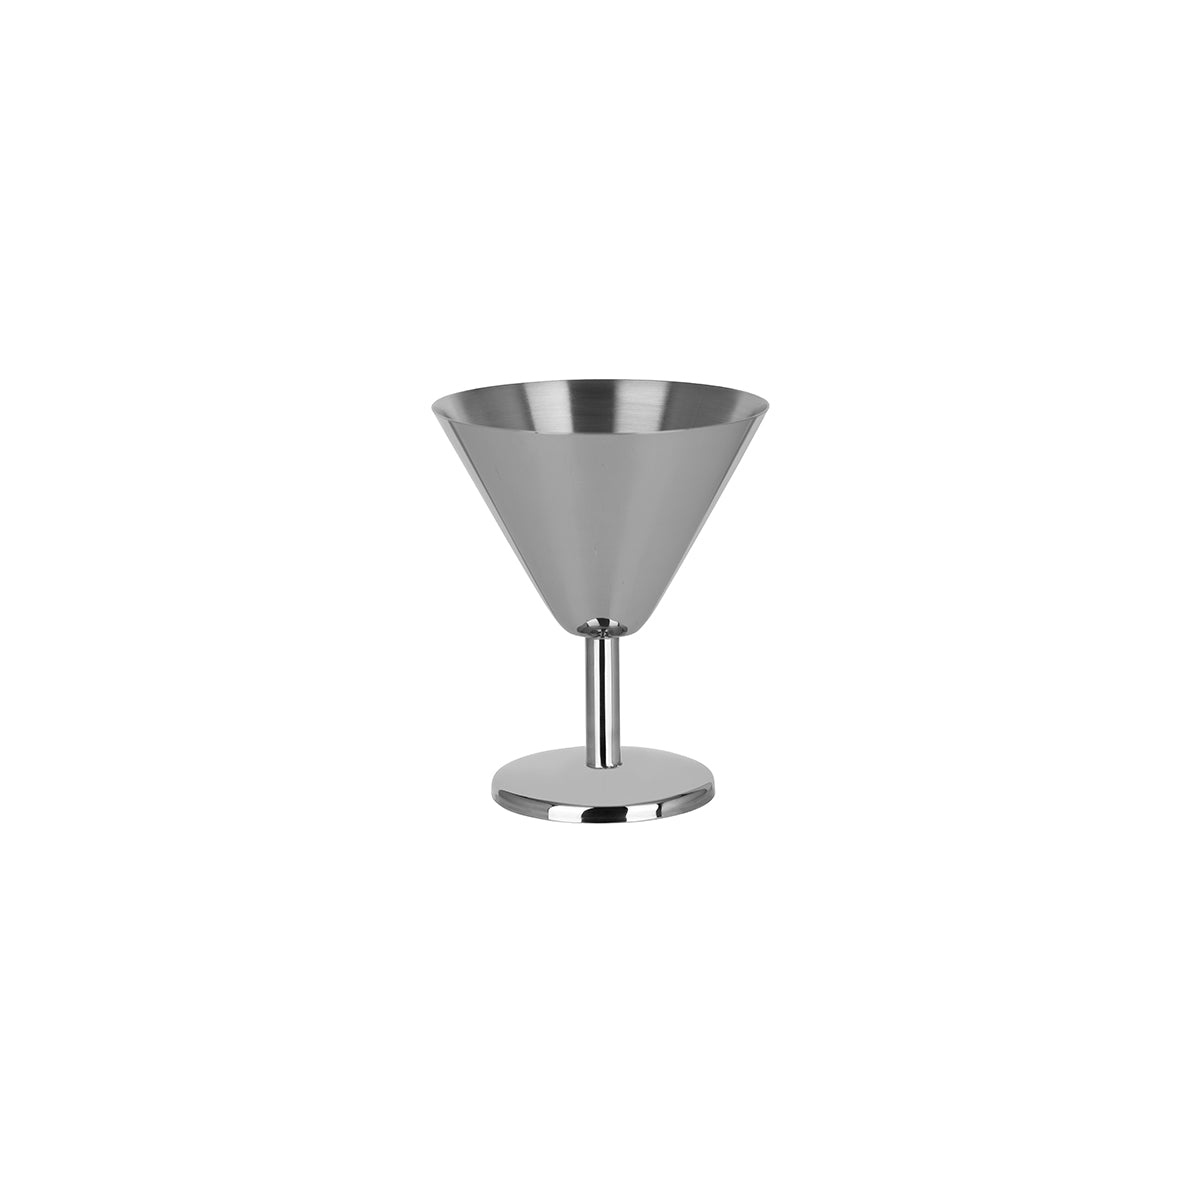 07550 Chef Inox Seafood Cocktail Conical Stainless Steel 94x81mm / 150ml Tomkin Australia Hospitality Supplies